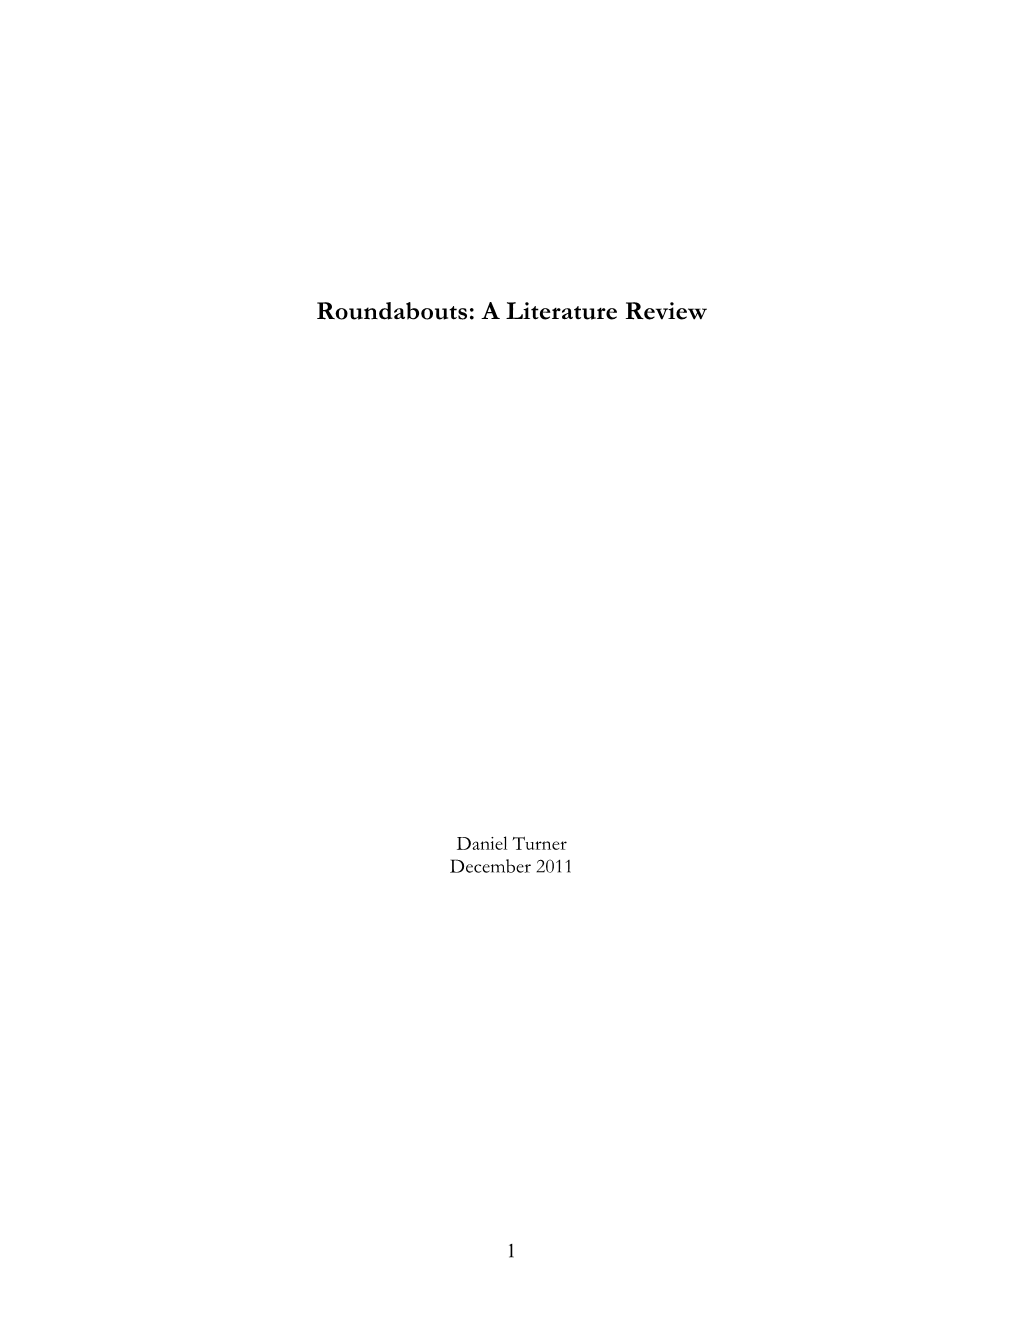 Roundabouts: a Literature Review